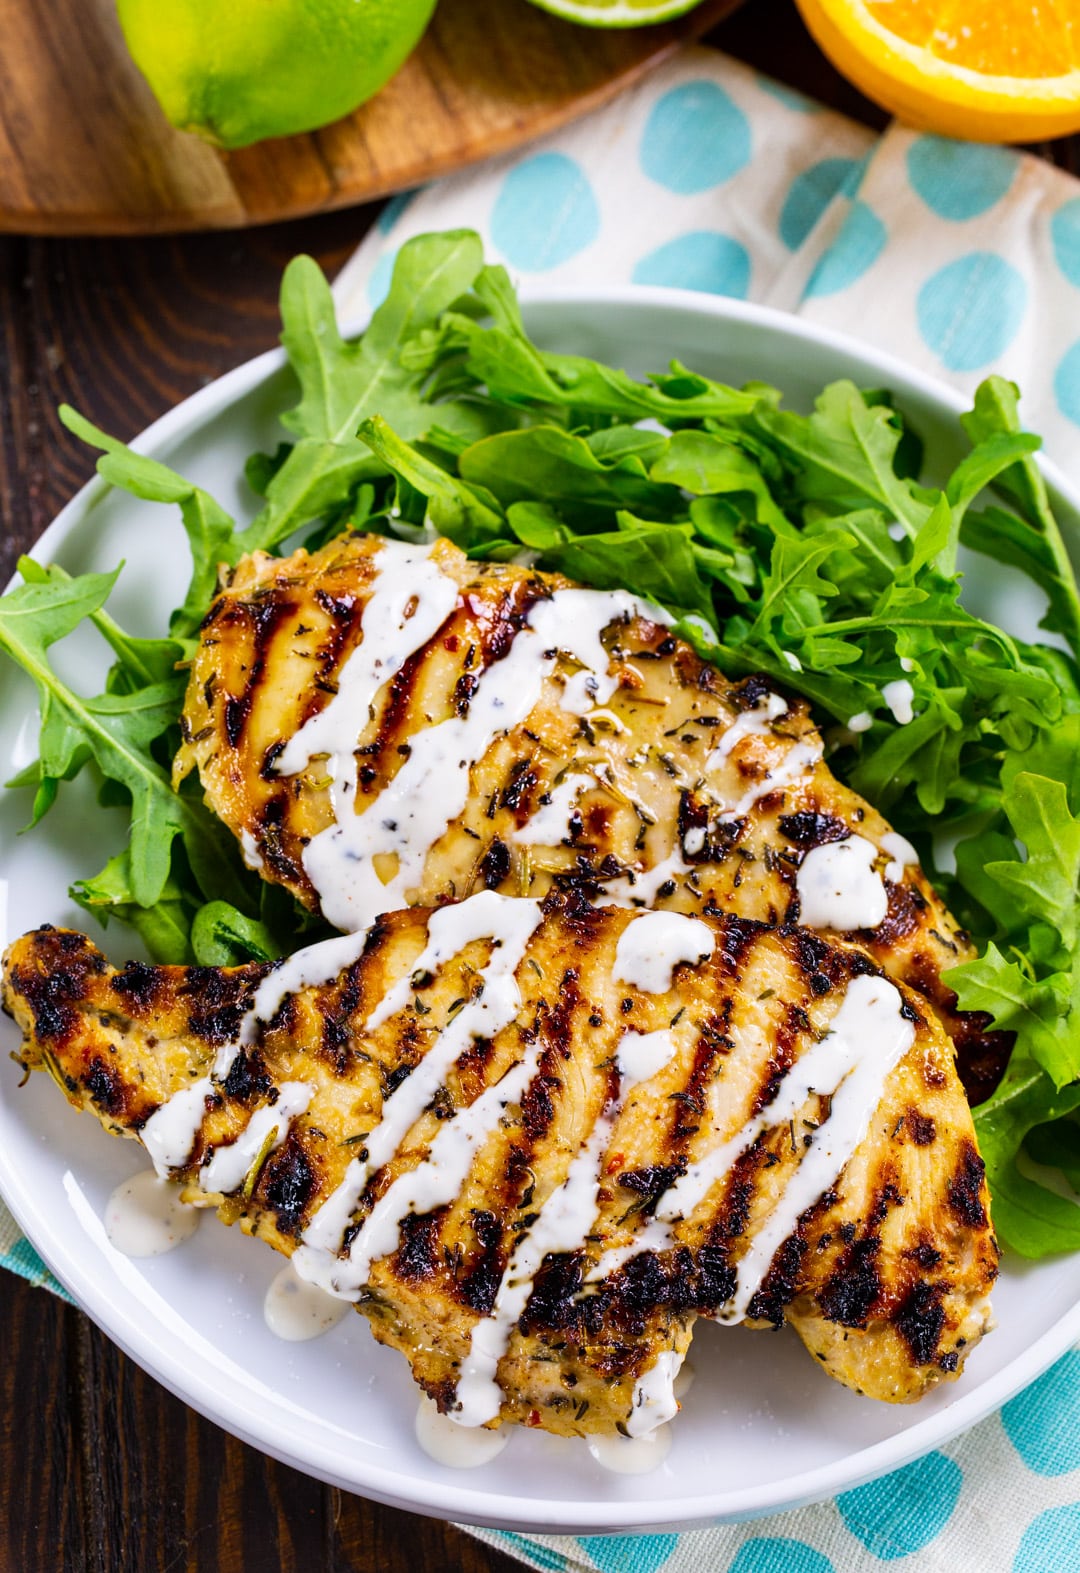 two Grilled Citrus Chicken Breasts on plate with arugula.